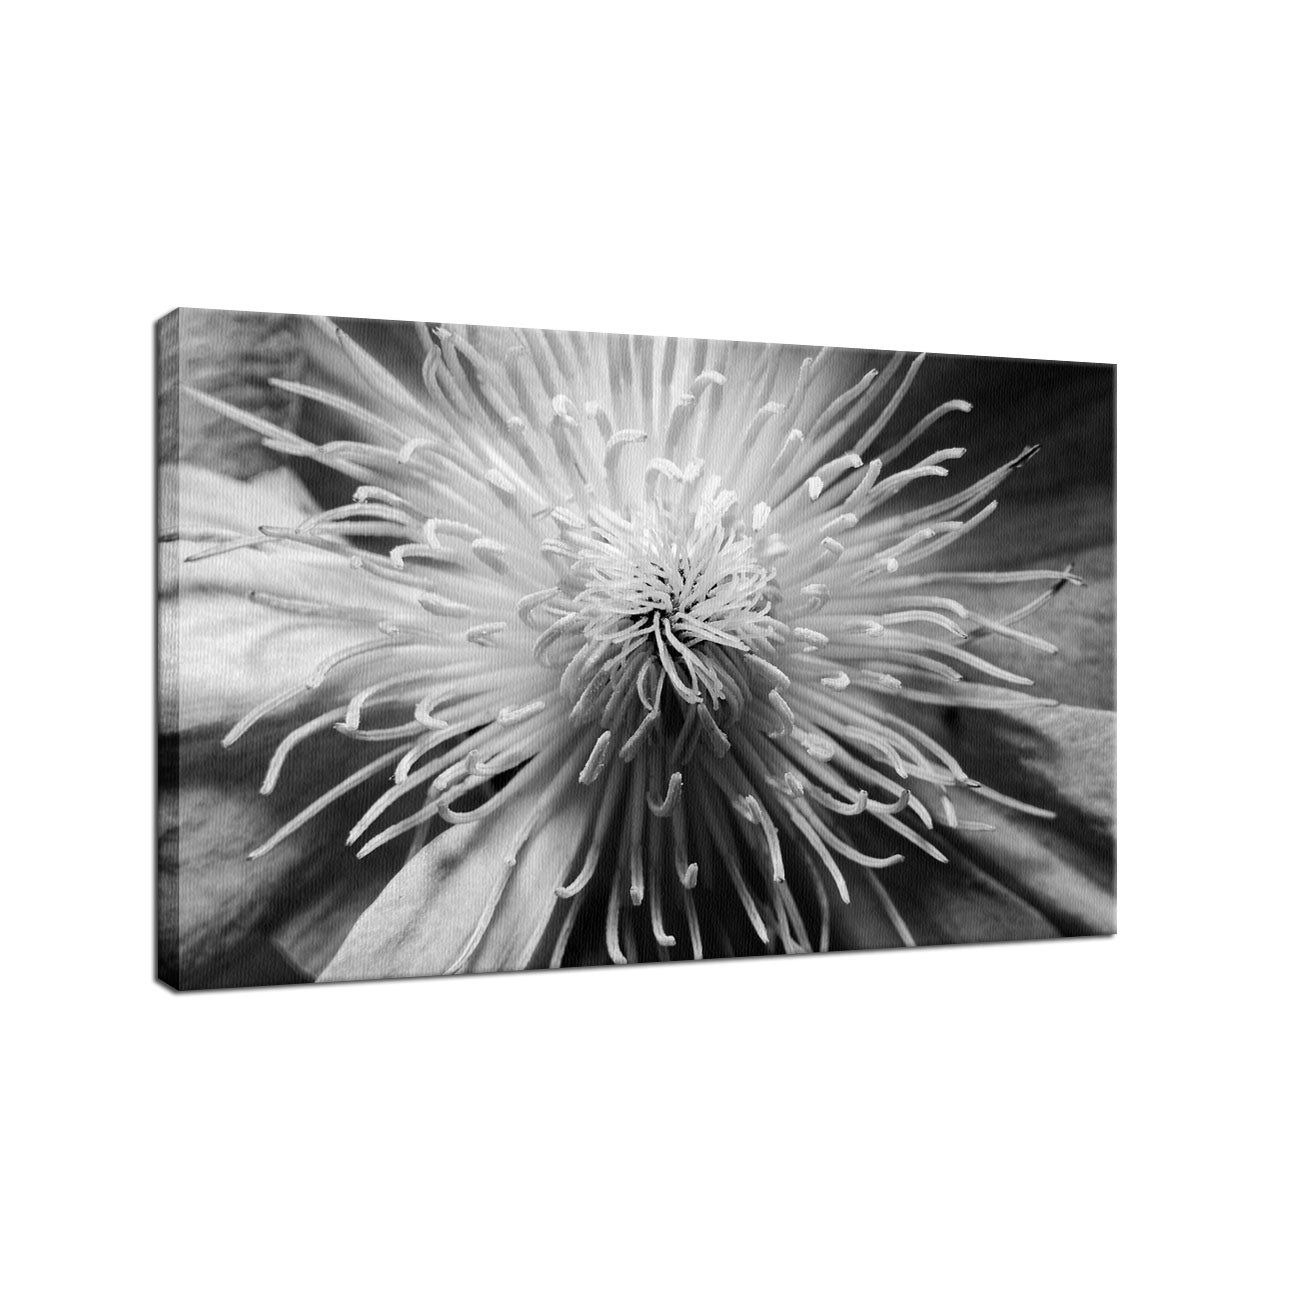 Center of Clematis - Black and White Nature / Floral Photo Fine Art Canvas Wall Art Prints  - PIPAFINEART